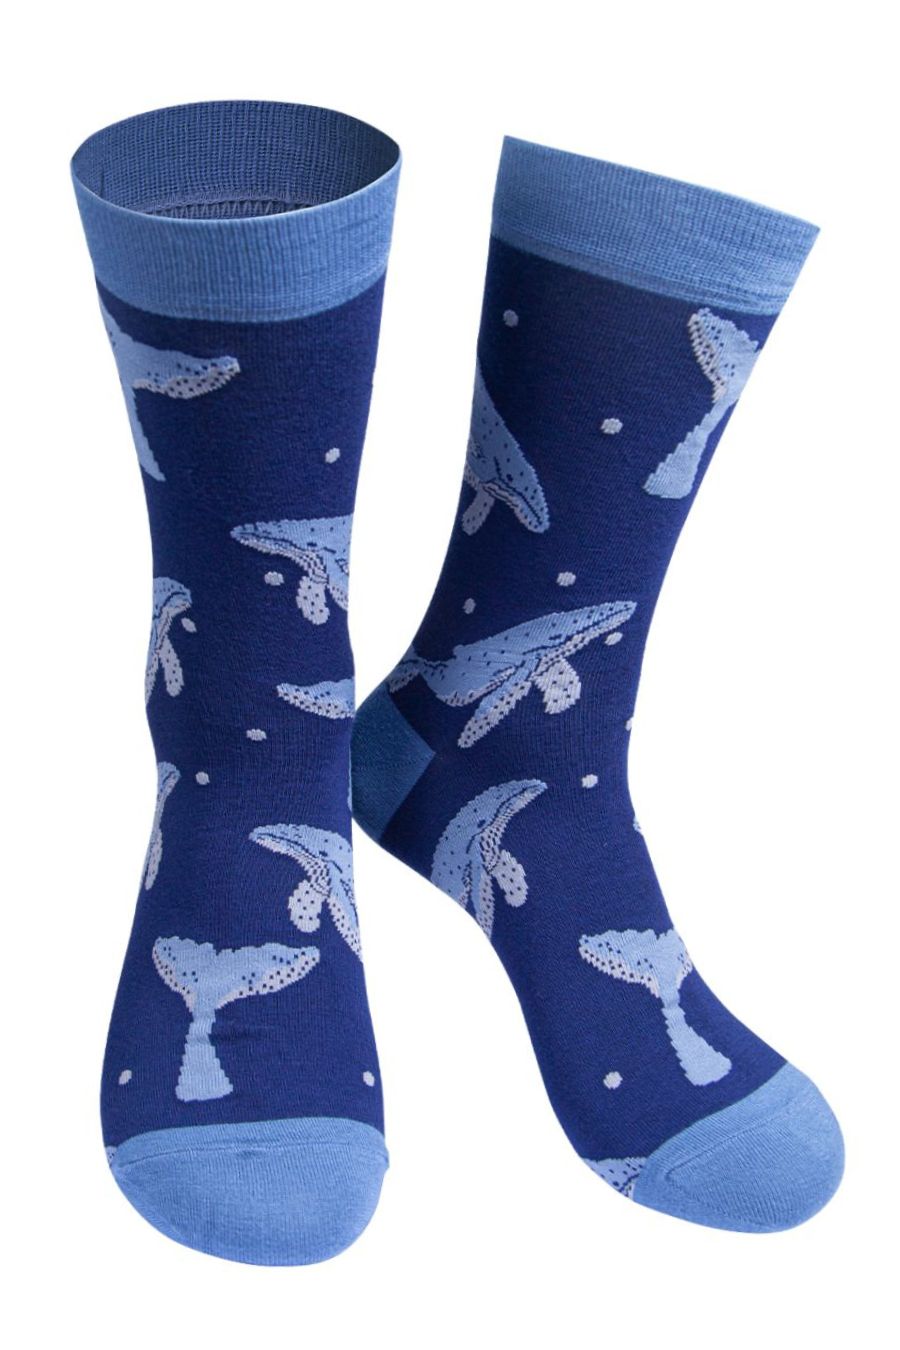 blue dress socks with a pattern of diving blue whales